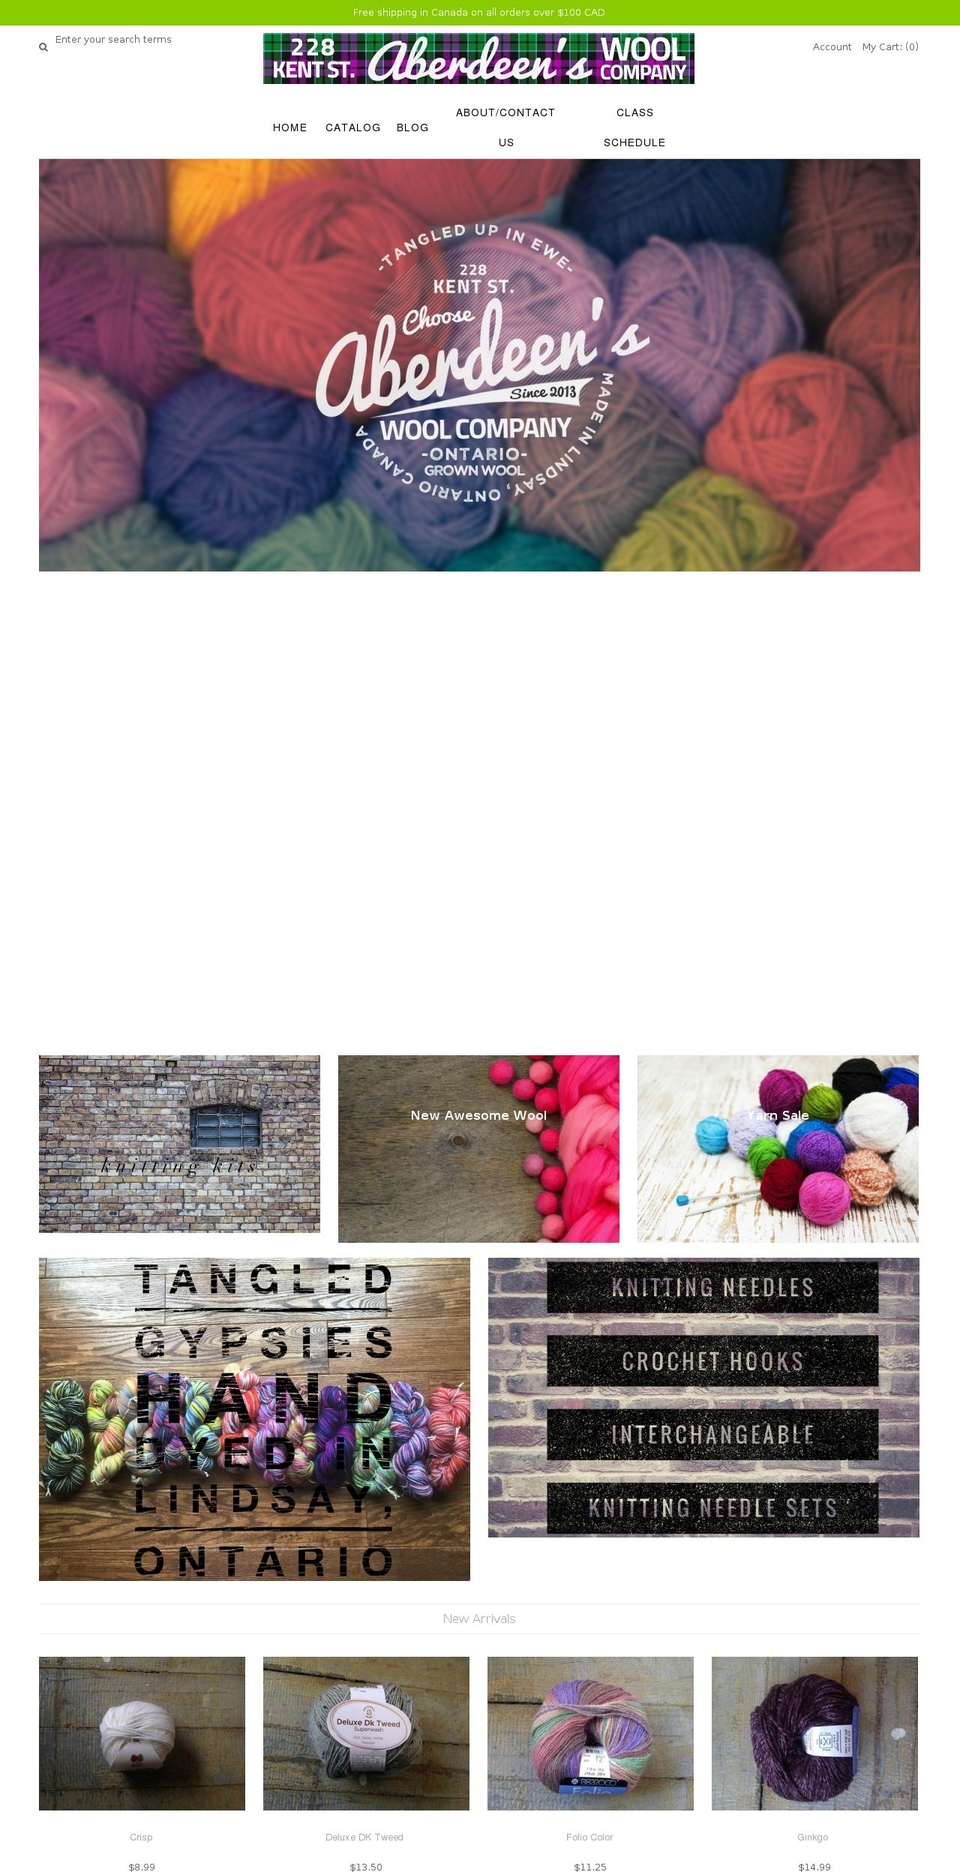 Galleria Shopify theme site example aberdeenswool.ca